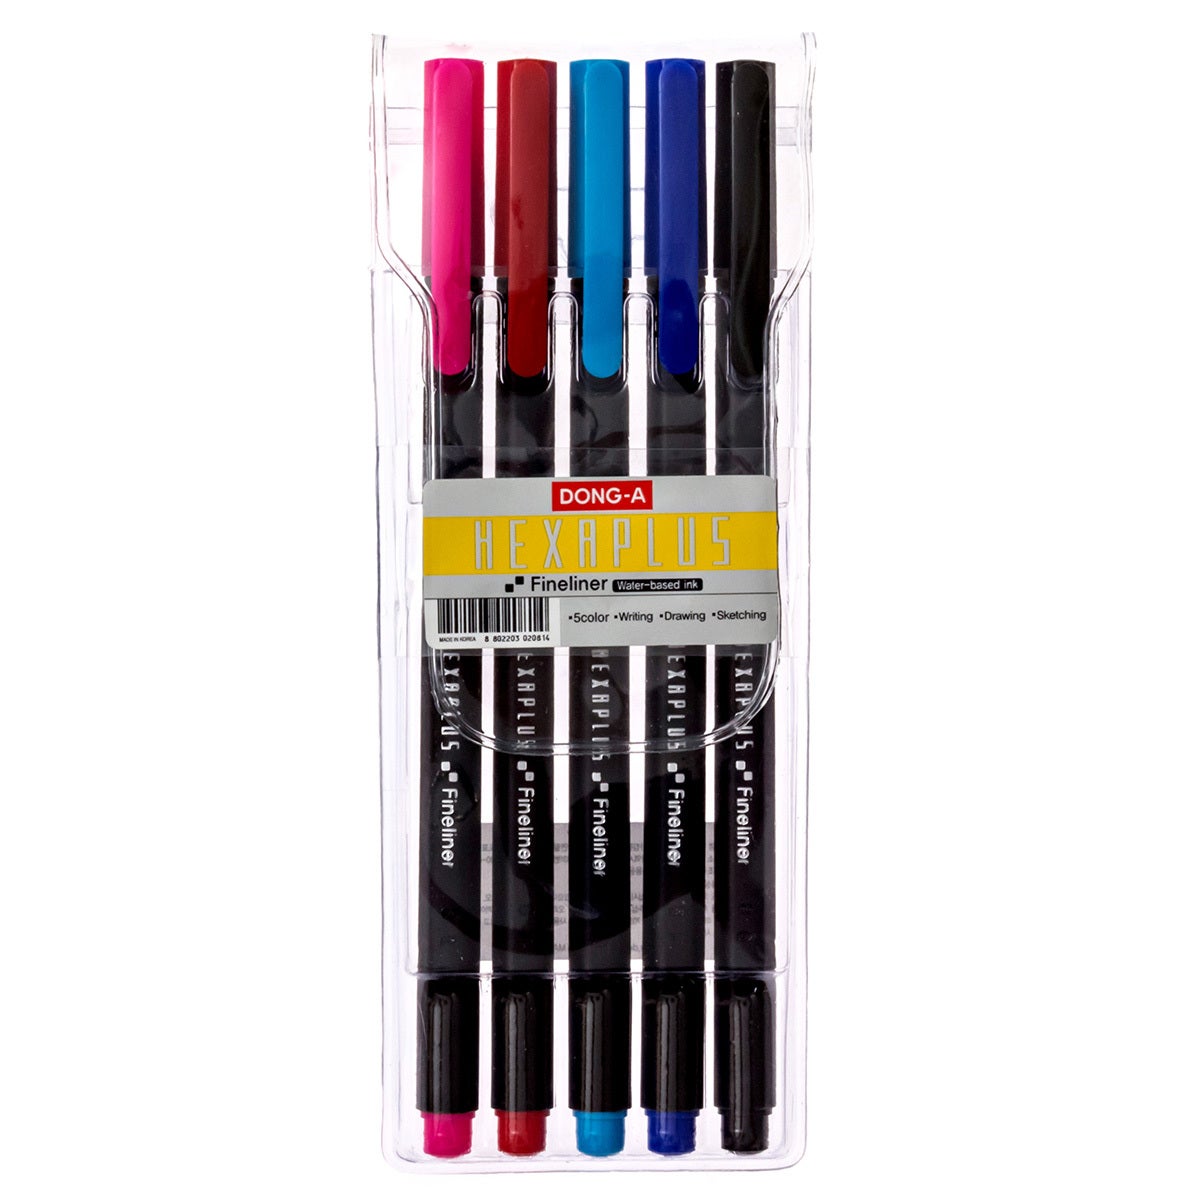 DONG-A Hexaplus Fineliner - 5 Color Set product image 1